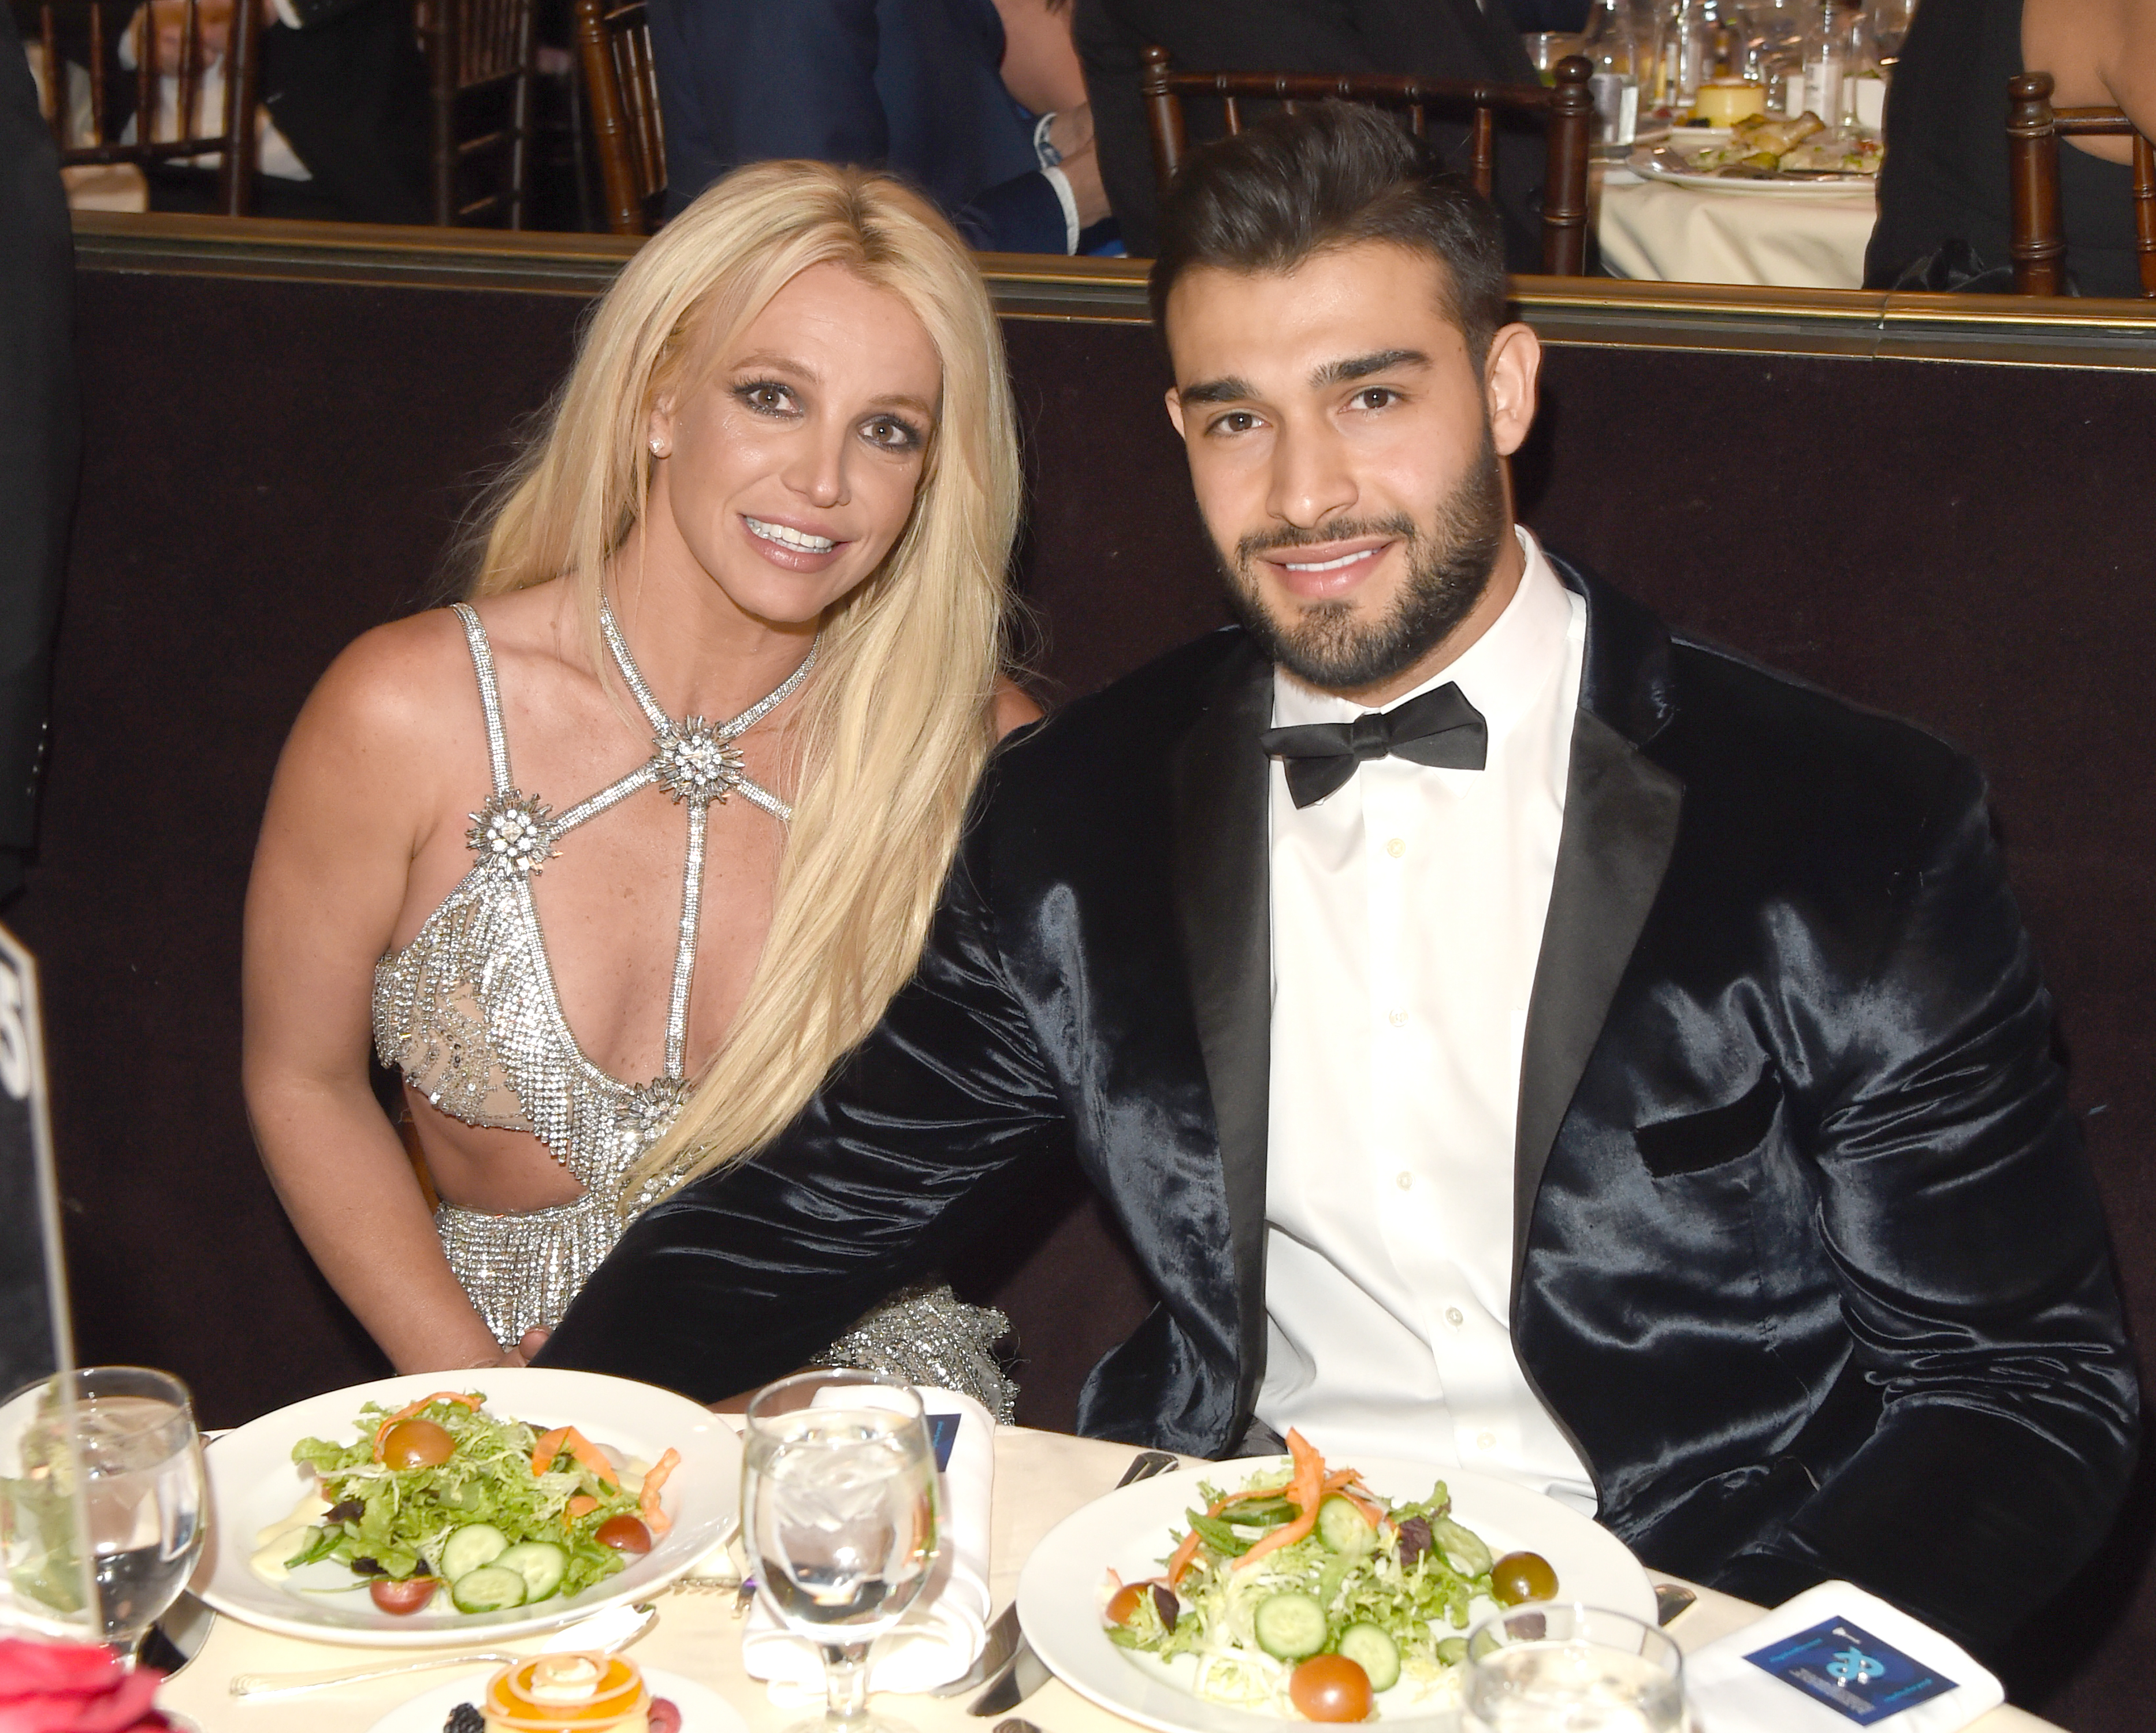 Close-up of Britney and Sam smiling and sitting together at a dining table